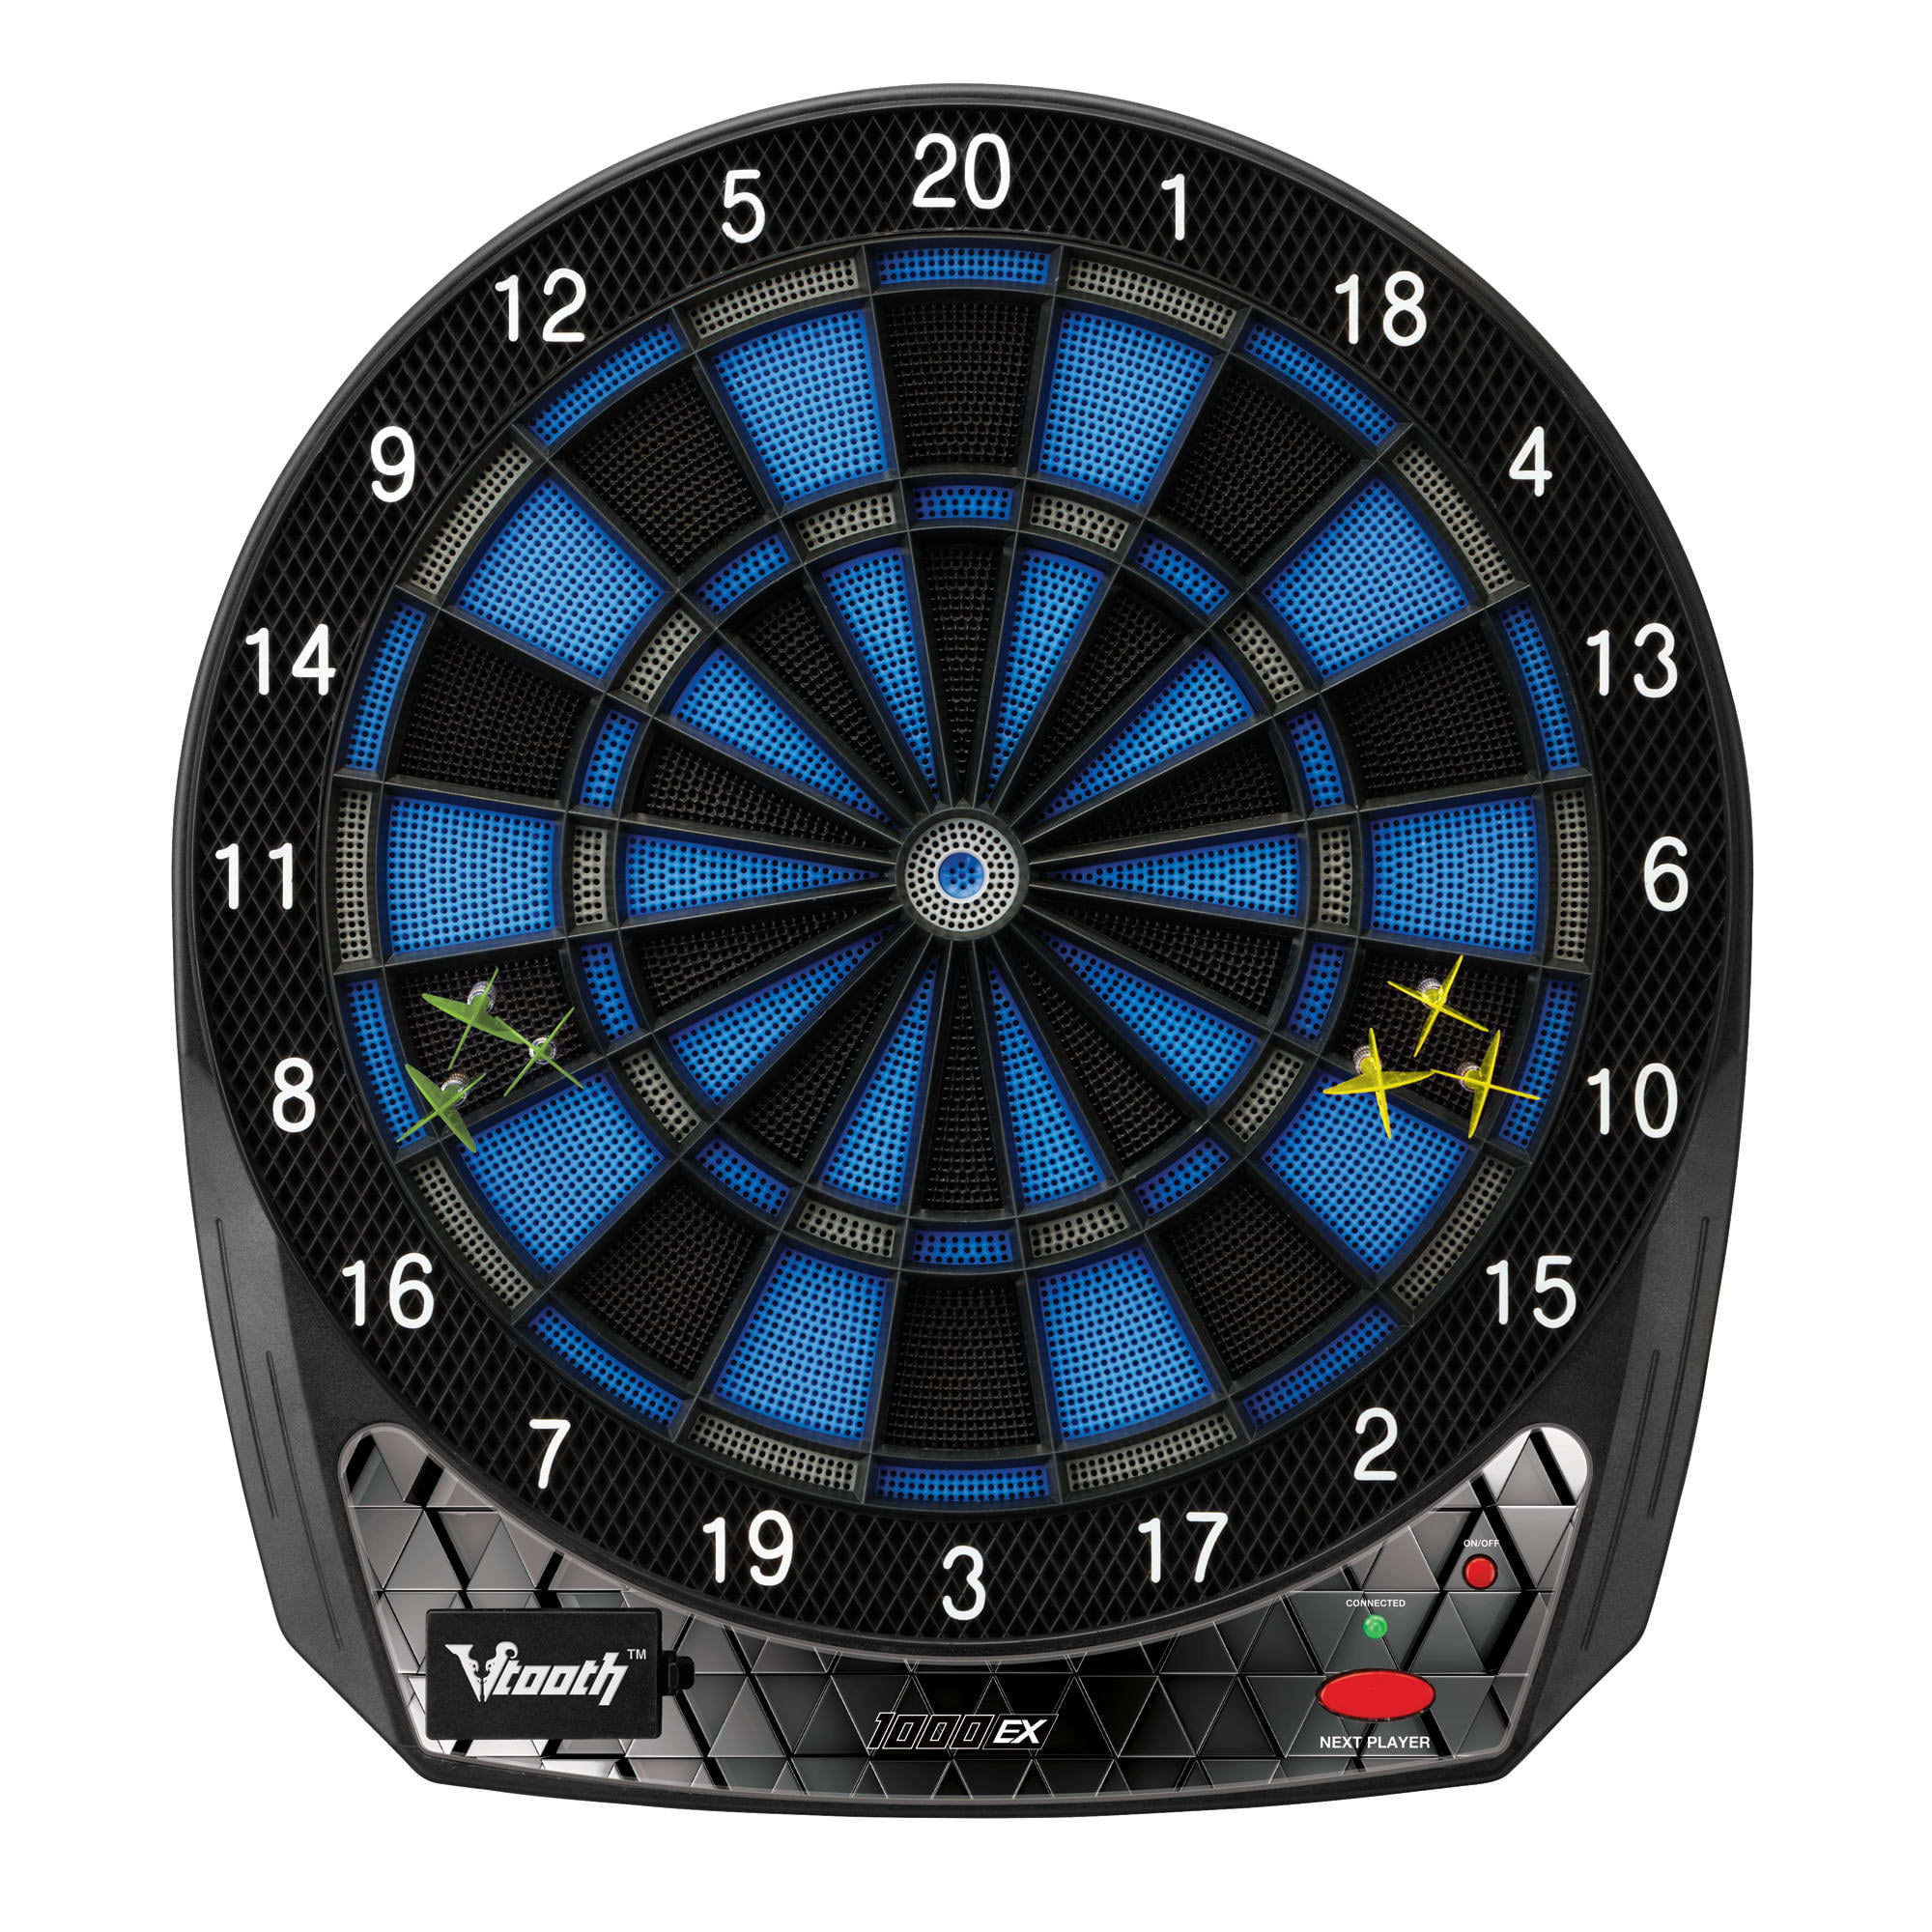 GLD Viper VTooth 1000 EX Wireless Electronic Dartboard w/ V-Tooth Mobile App